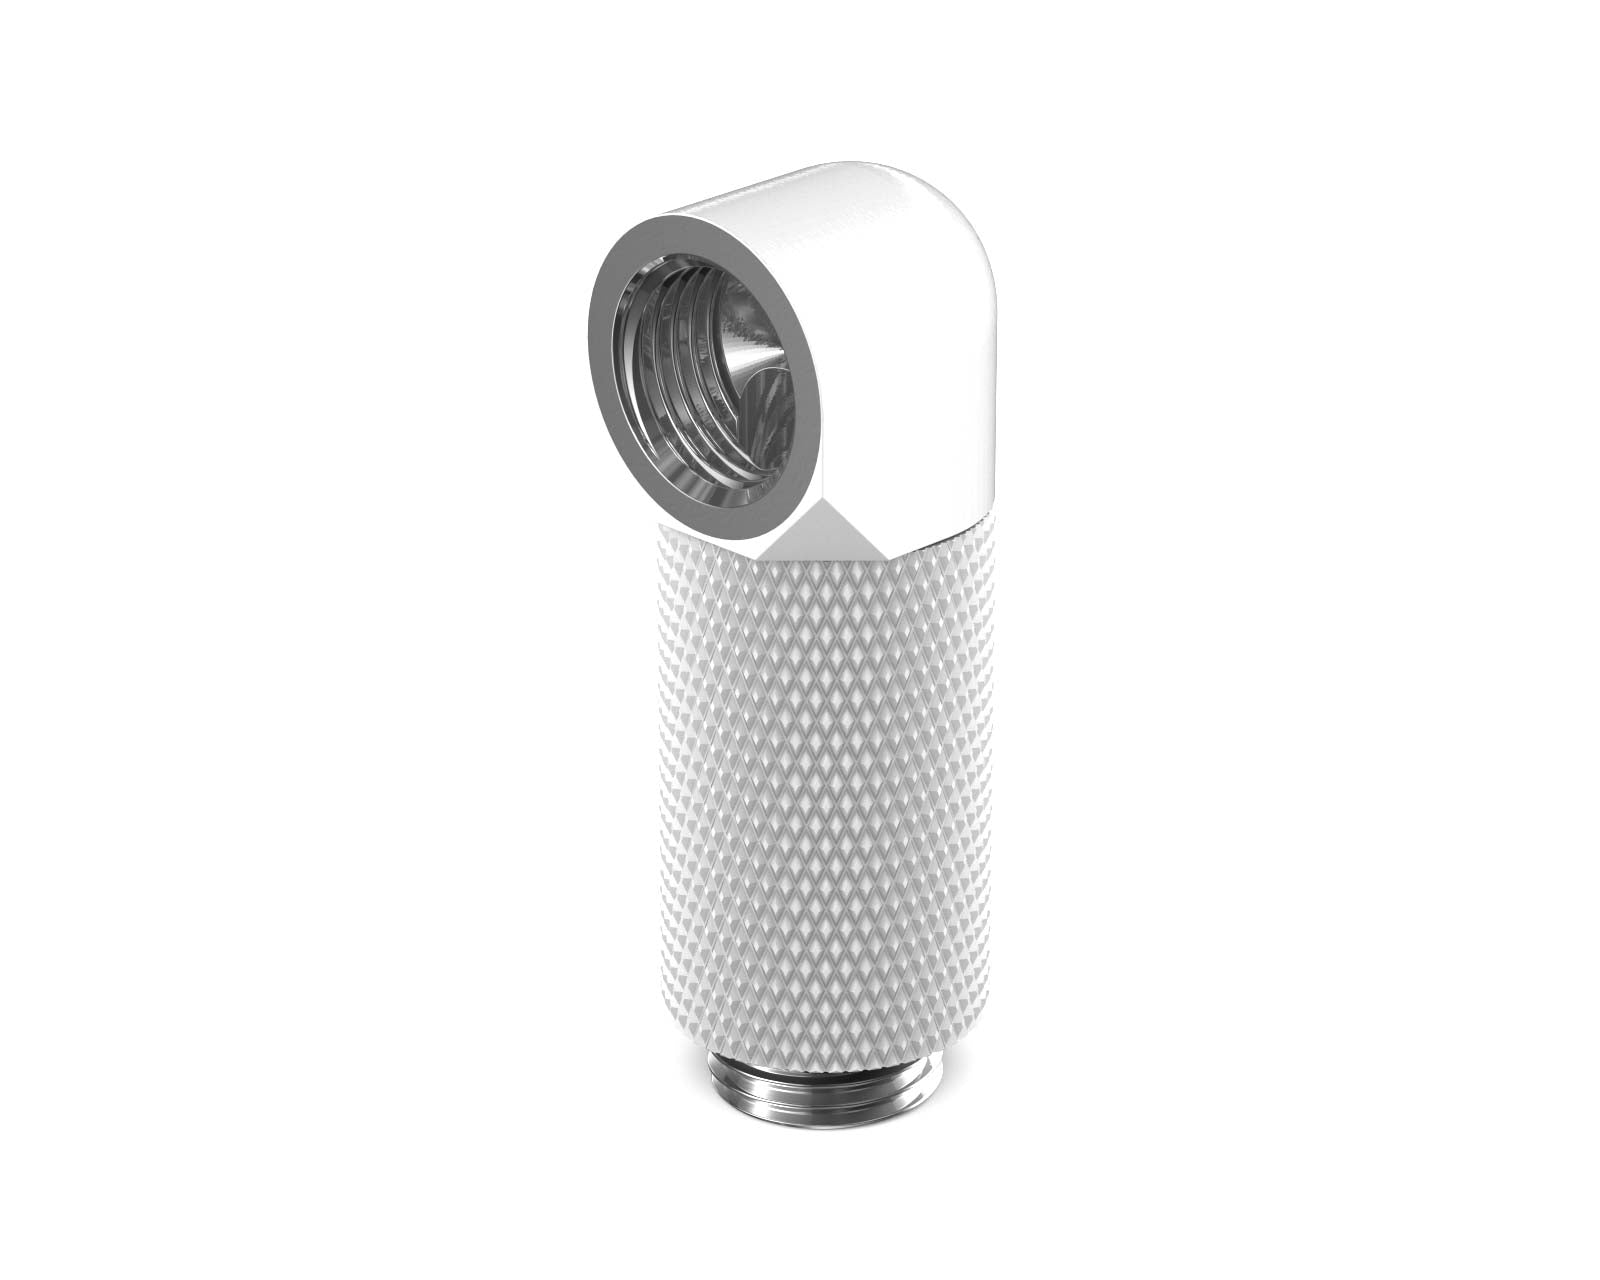 PrimoChill Male to Female G 1/4in. 90 Degree SX Rotary 30mm Extension Elbow Fitting - PrimoChill - KEEPING IT COOL Sky White